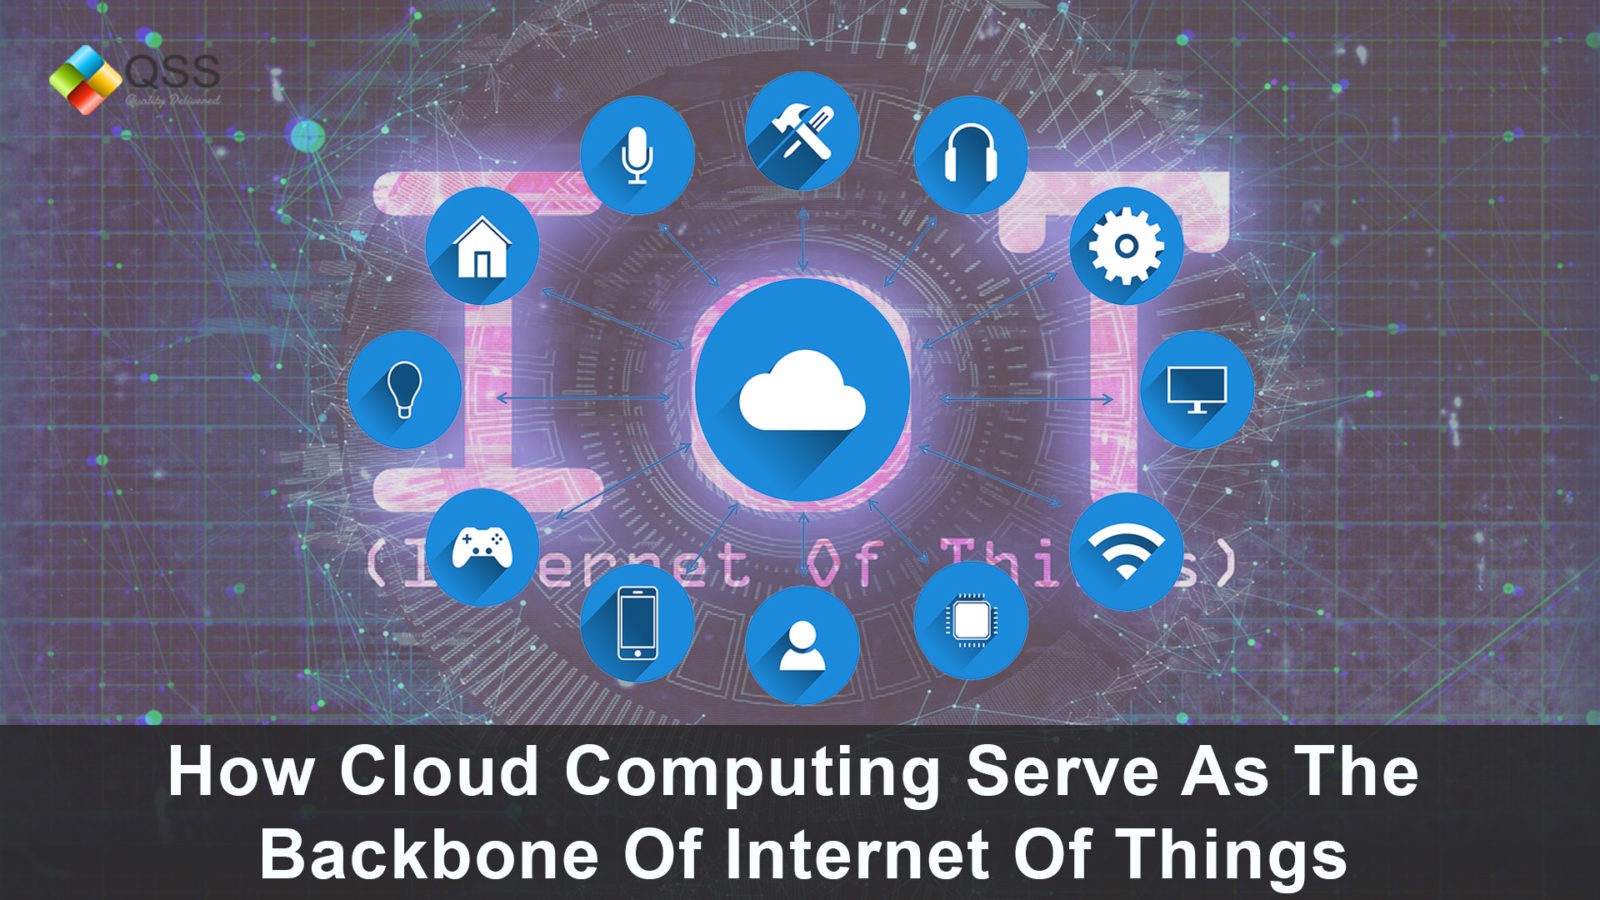 How Cloud Computing Serve As The Backbone Of Internet Of Things?